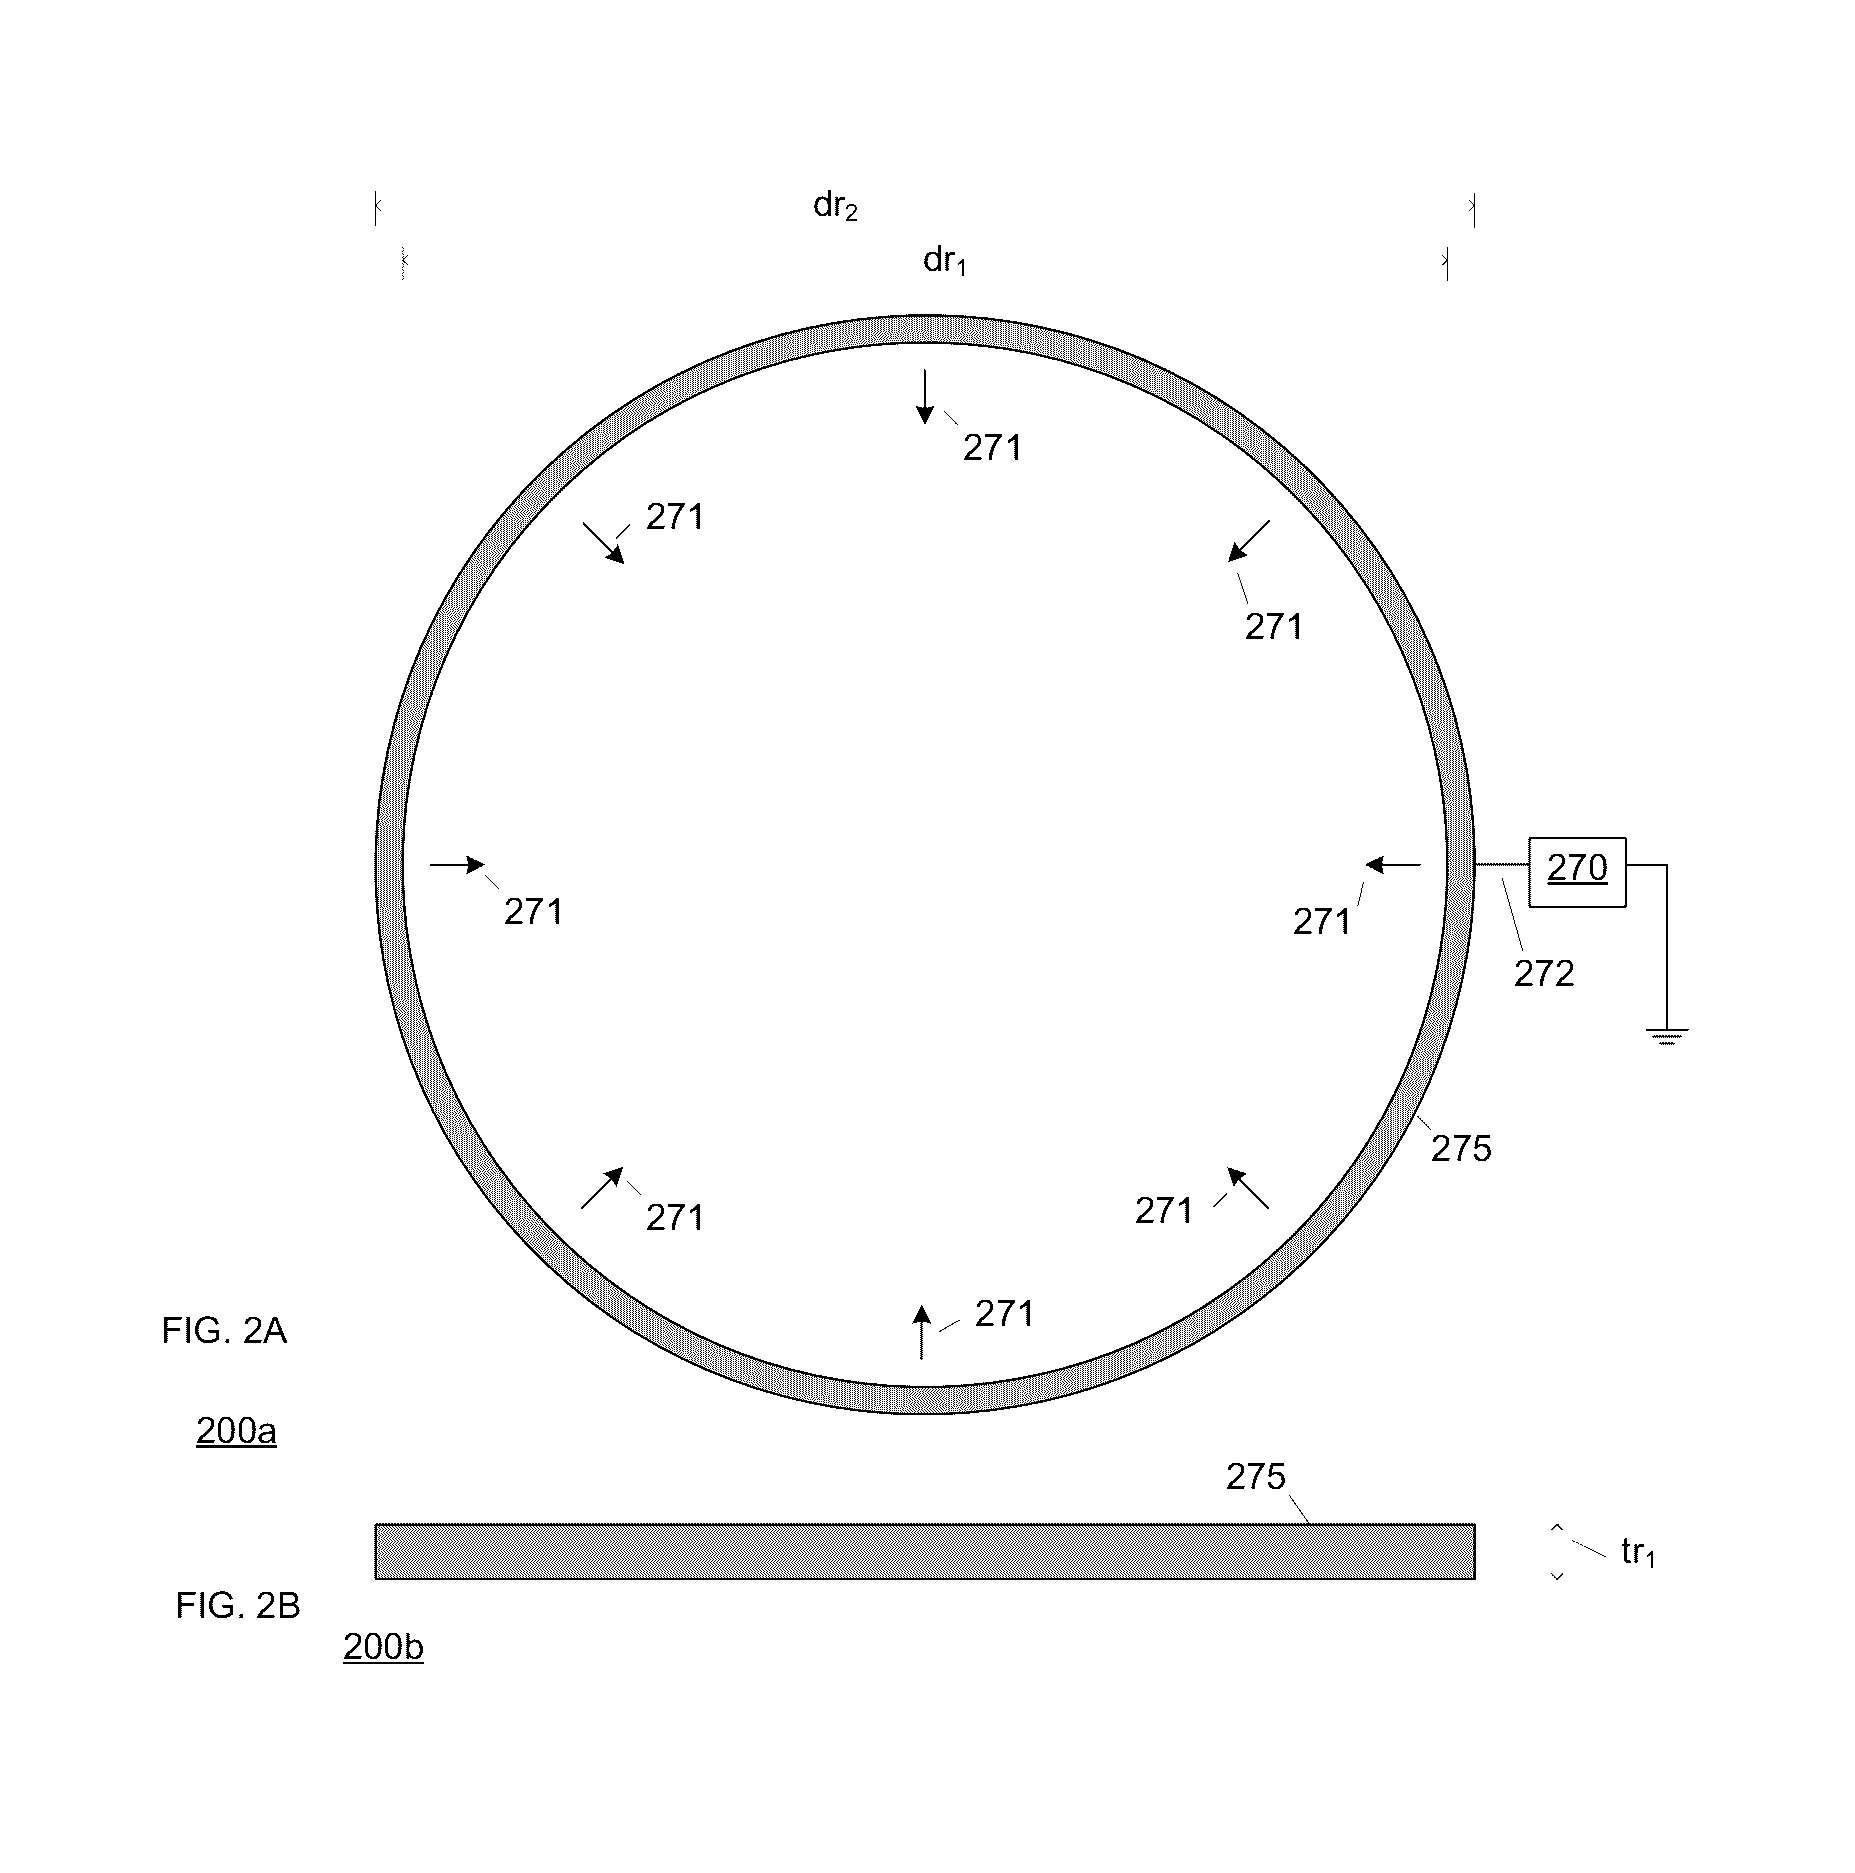 Plasma Generation and Control Using a DC Ring